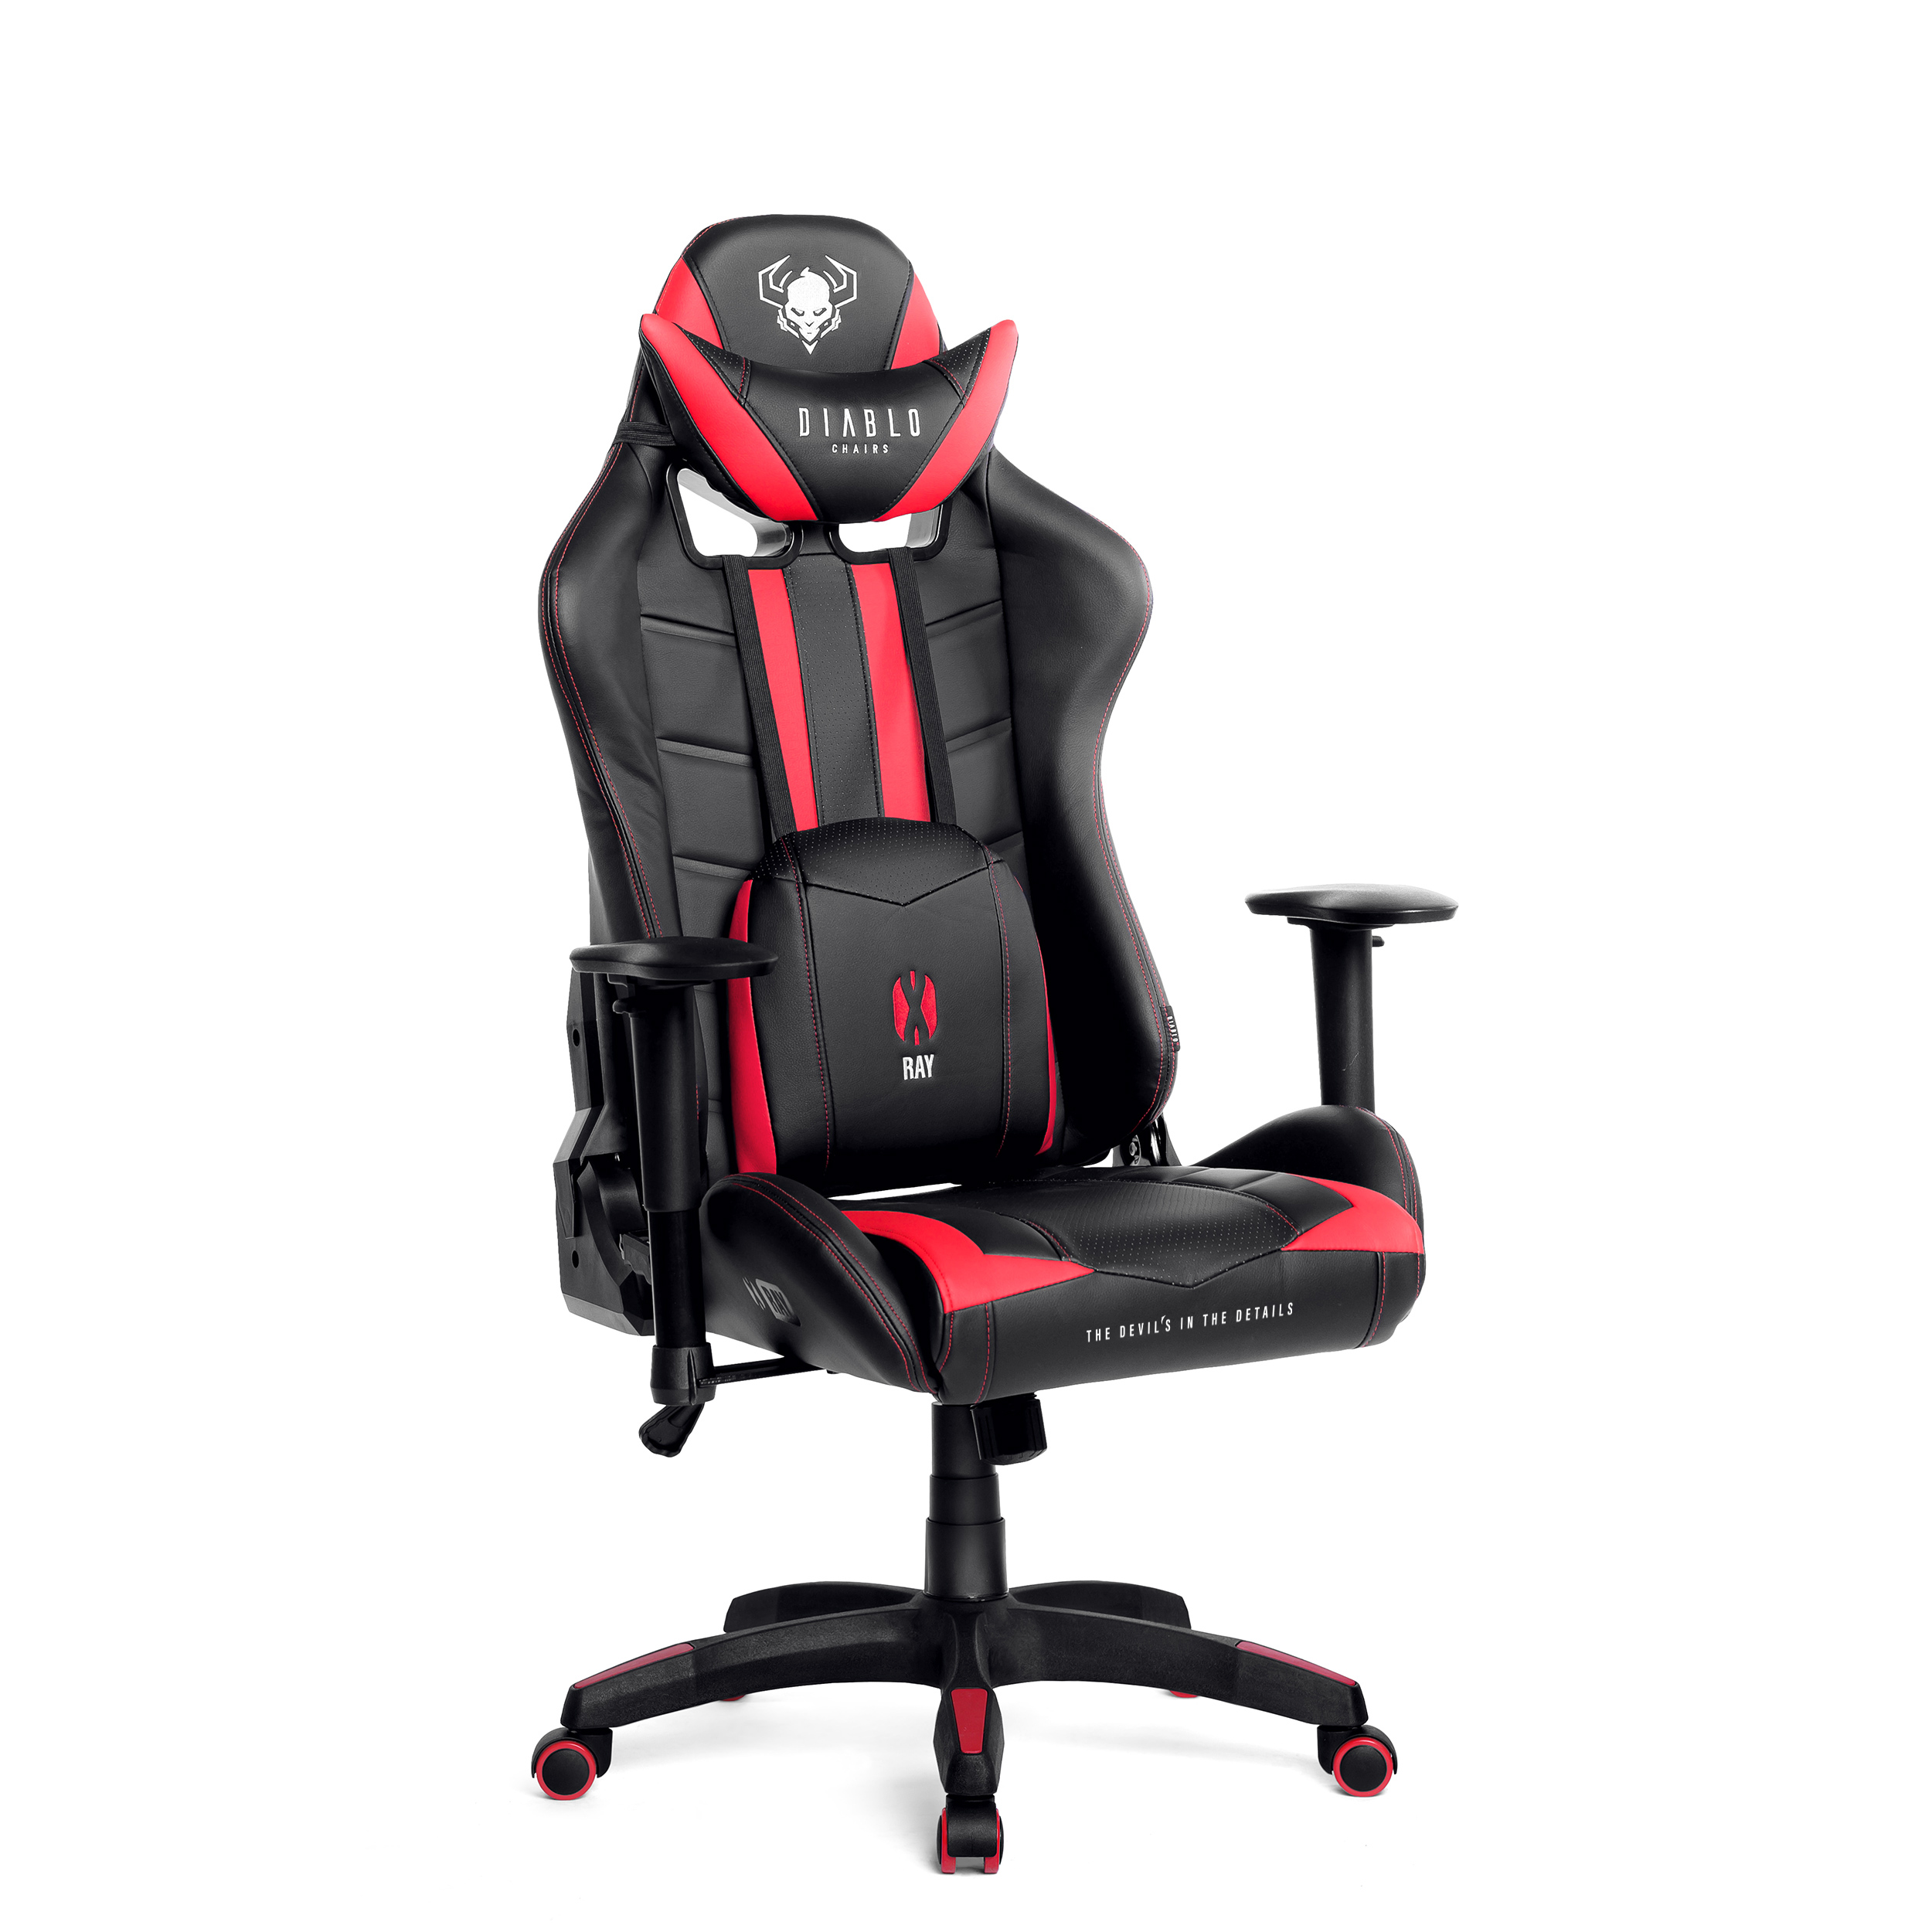 X-RAY GAMING Gaming DIABLO NORMAL black/red CHAIRS Chair, STUHL